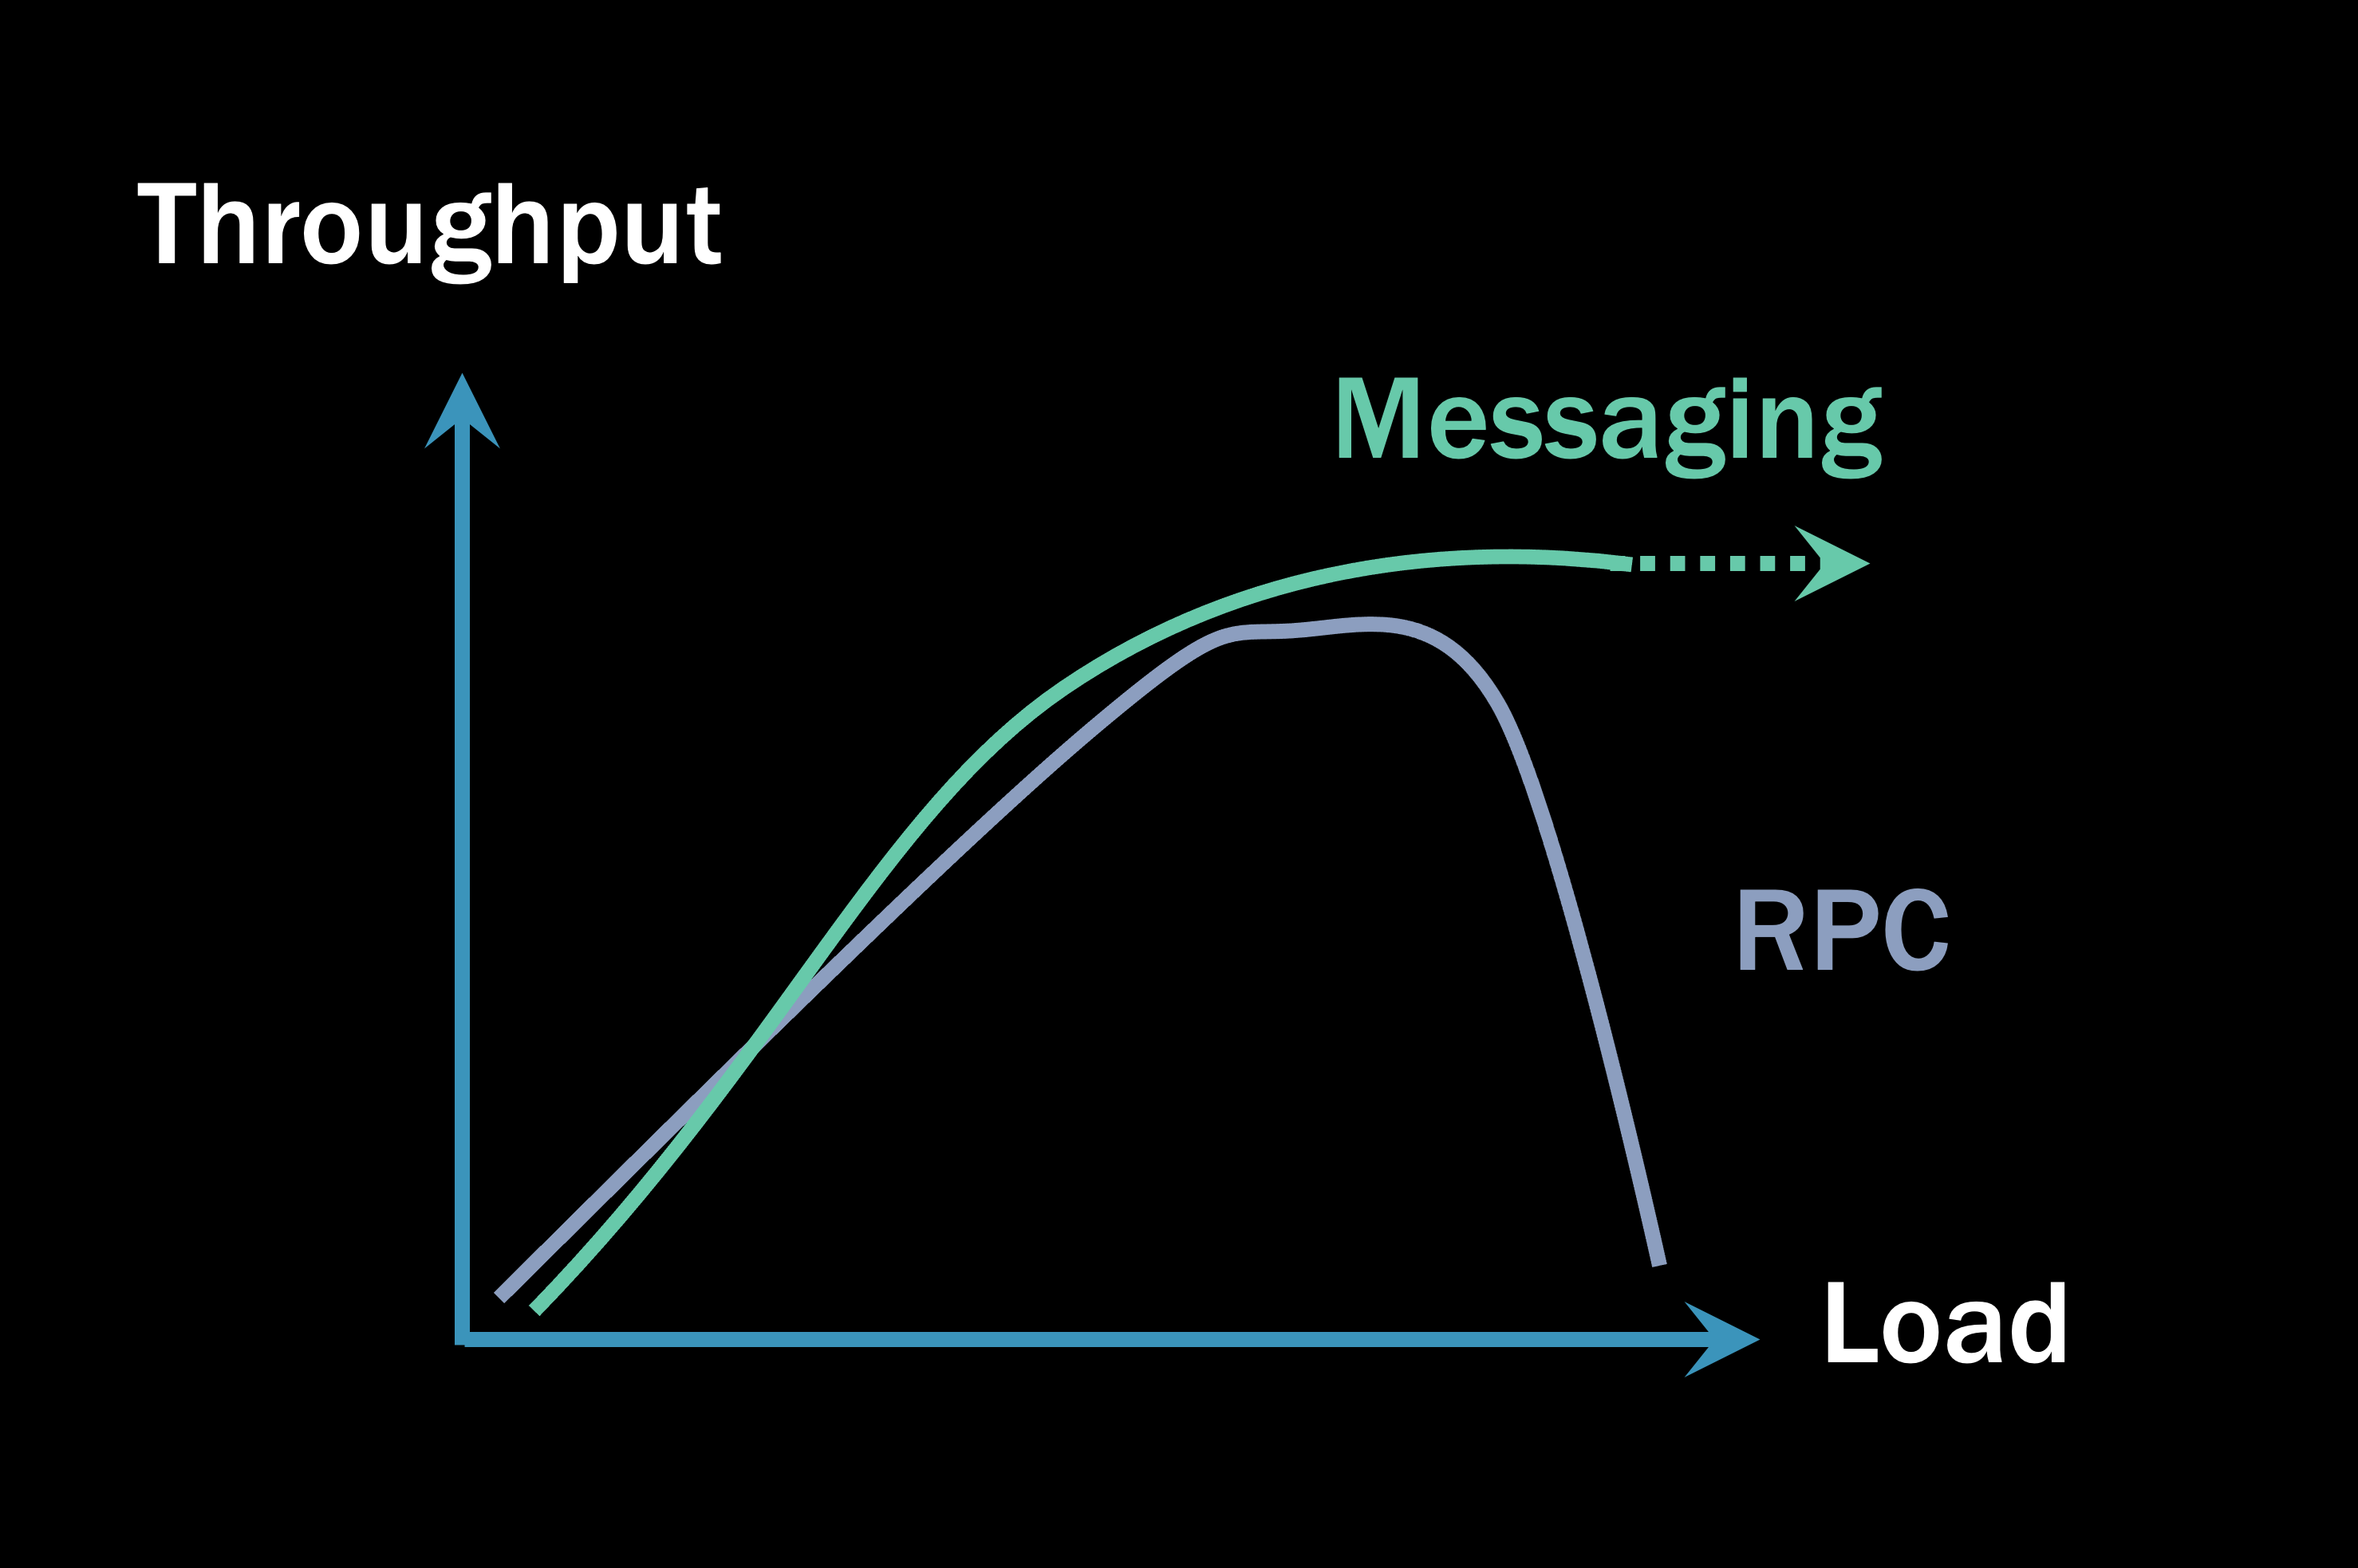 Messaging outperforms RPC systems under both medium and heavy loads